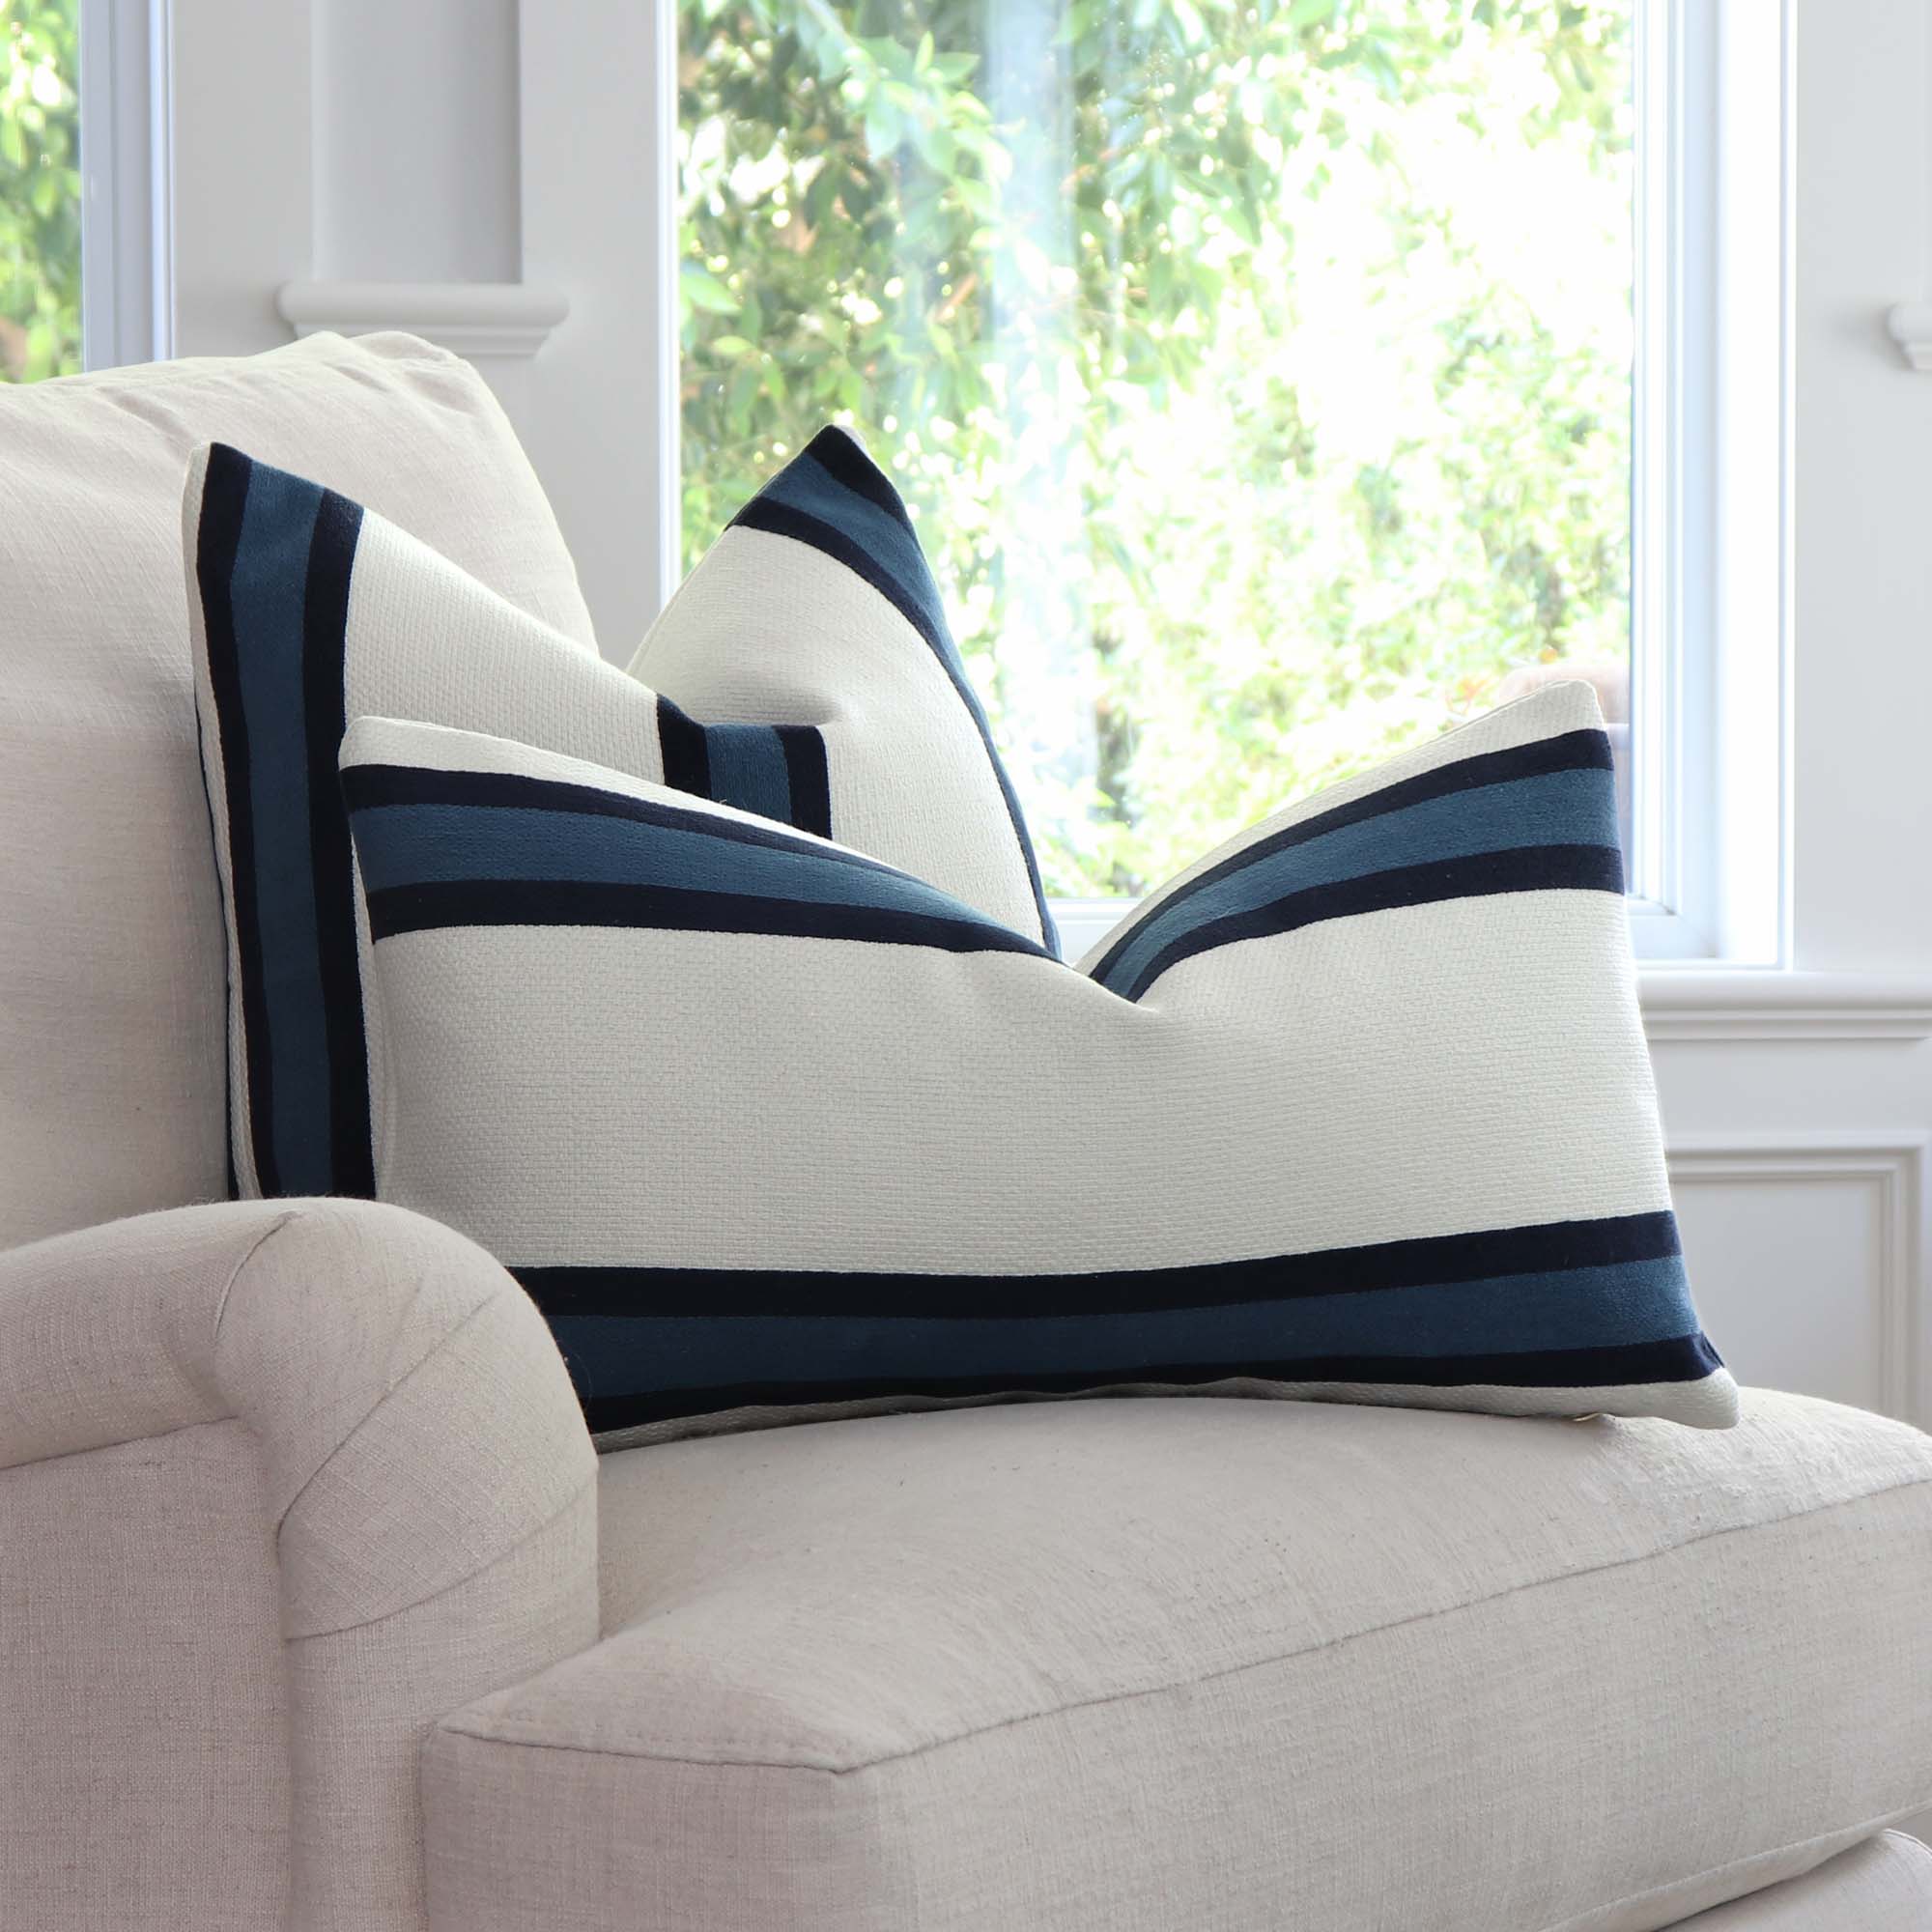 Thibaut Abito Navy Blue Stripe Designer Luxury Throw Pillow Cover on Accent Chair in Home Decor